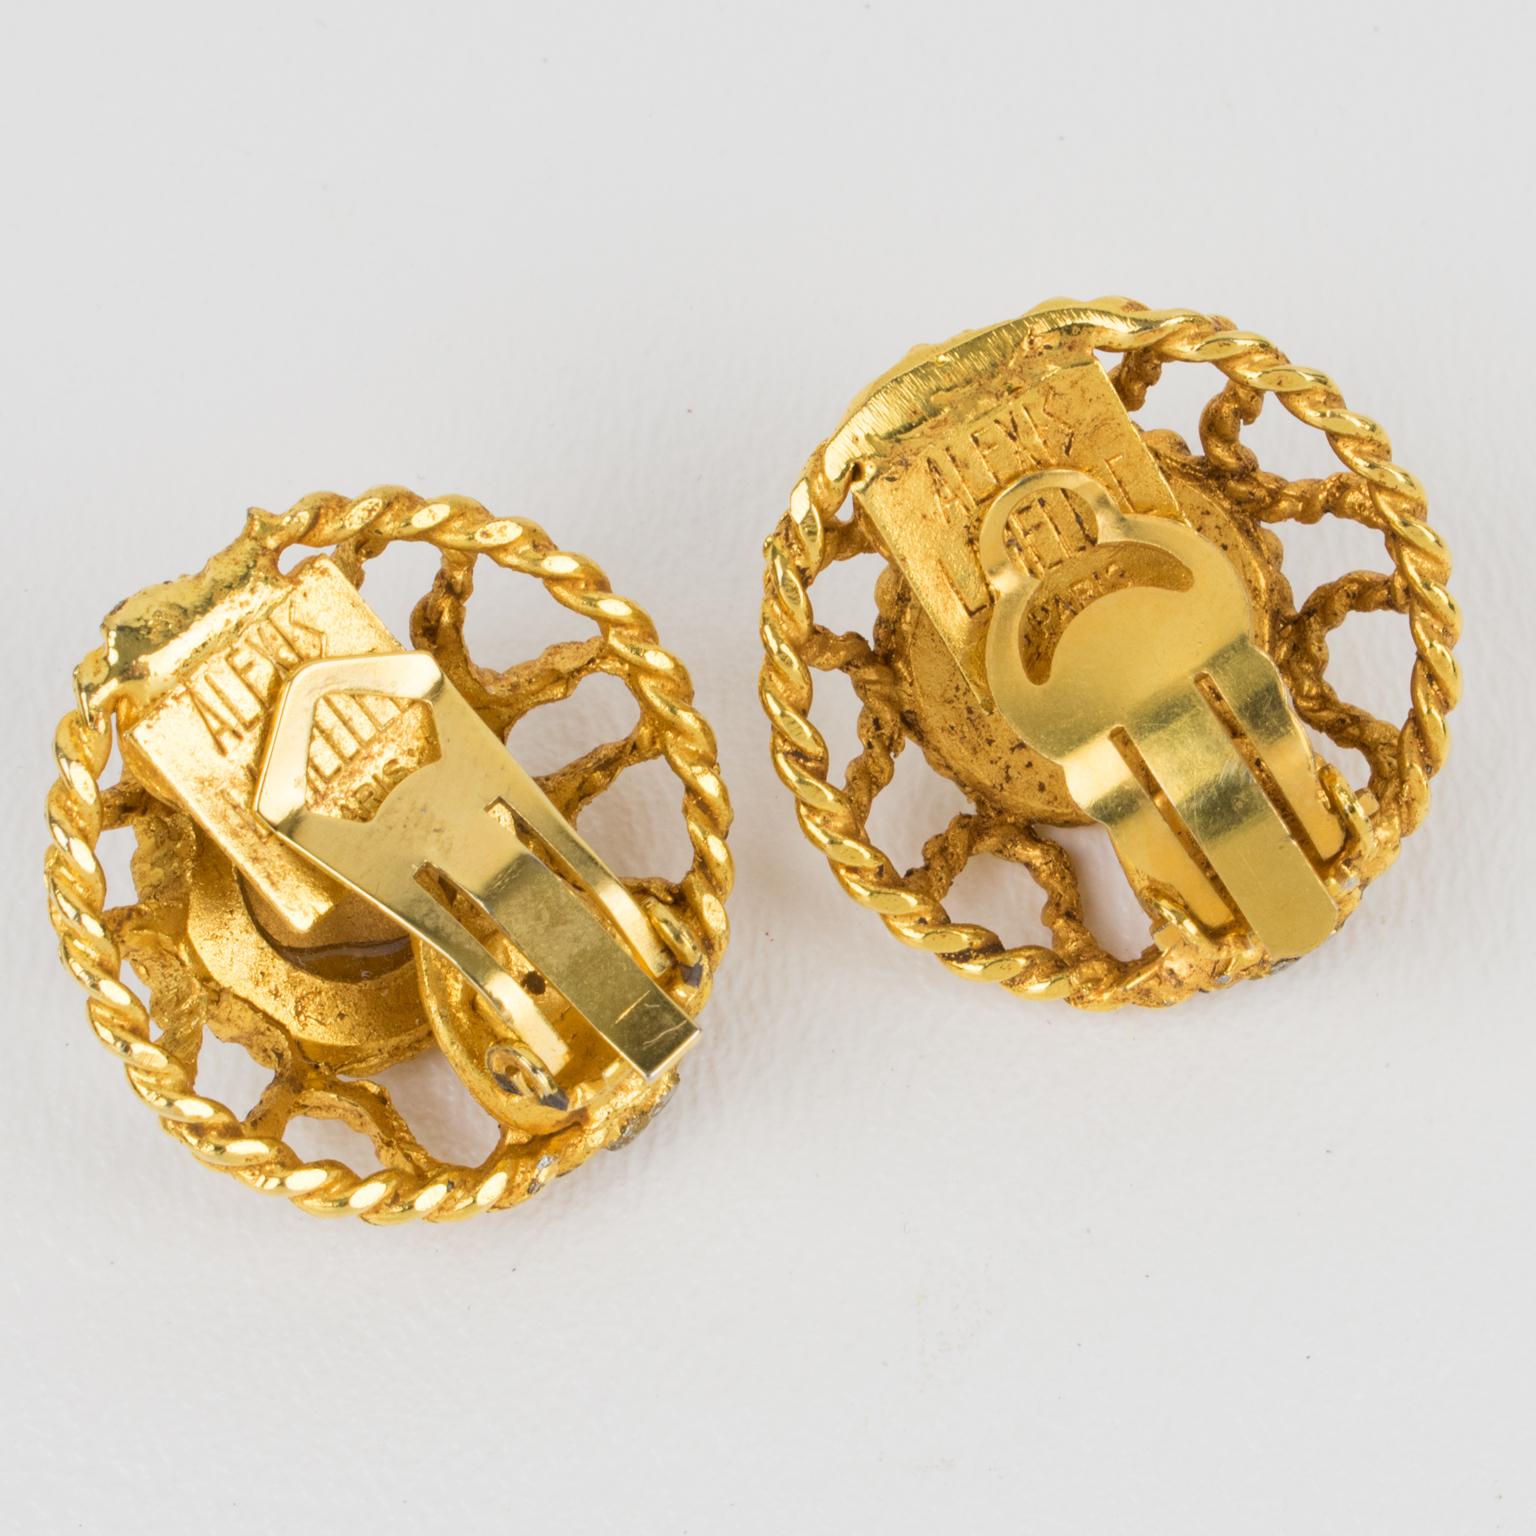 Modern  Alexis Lahellec Paris Clip Earrings Gilt Metal with Mirrored Glass Cabochons For Sale